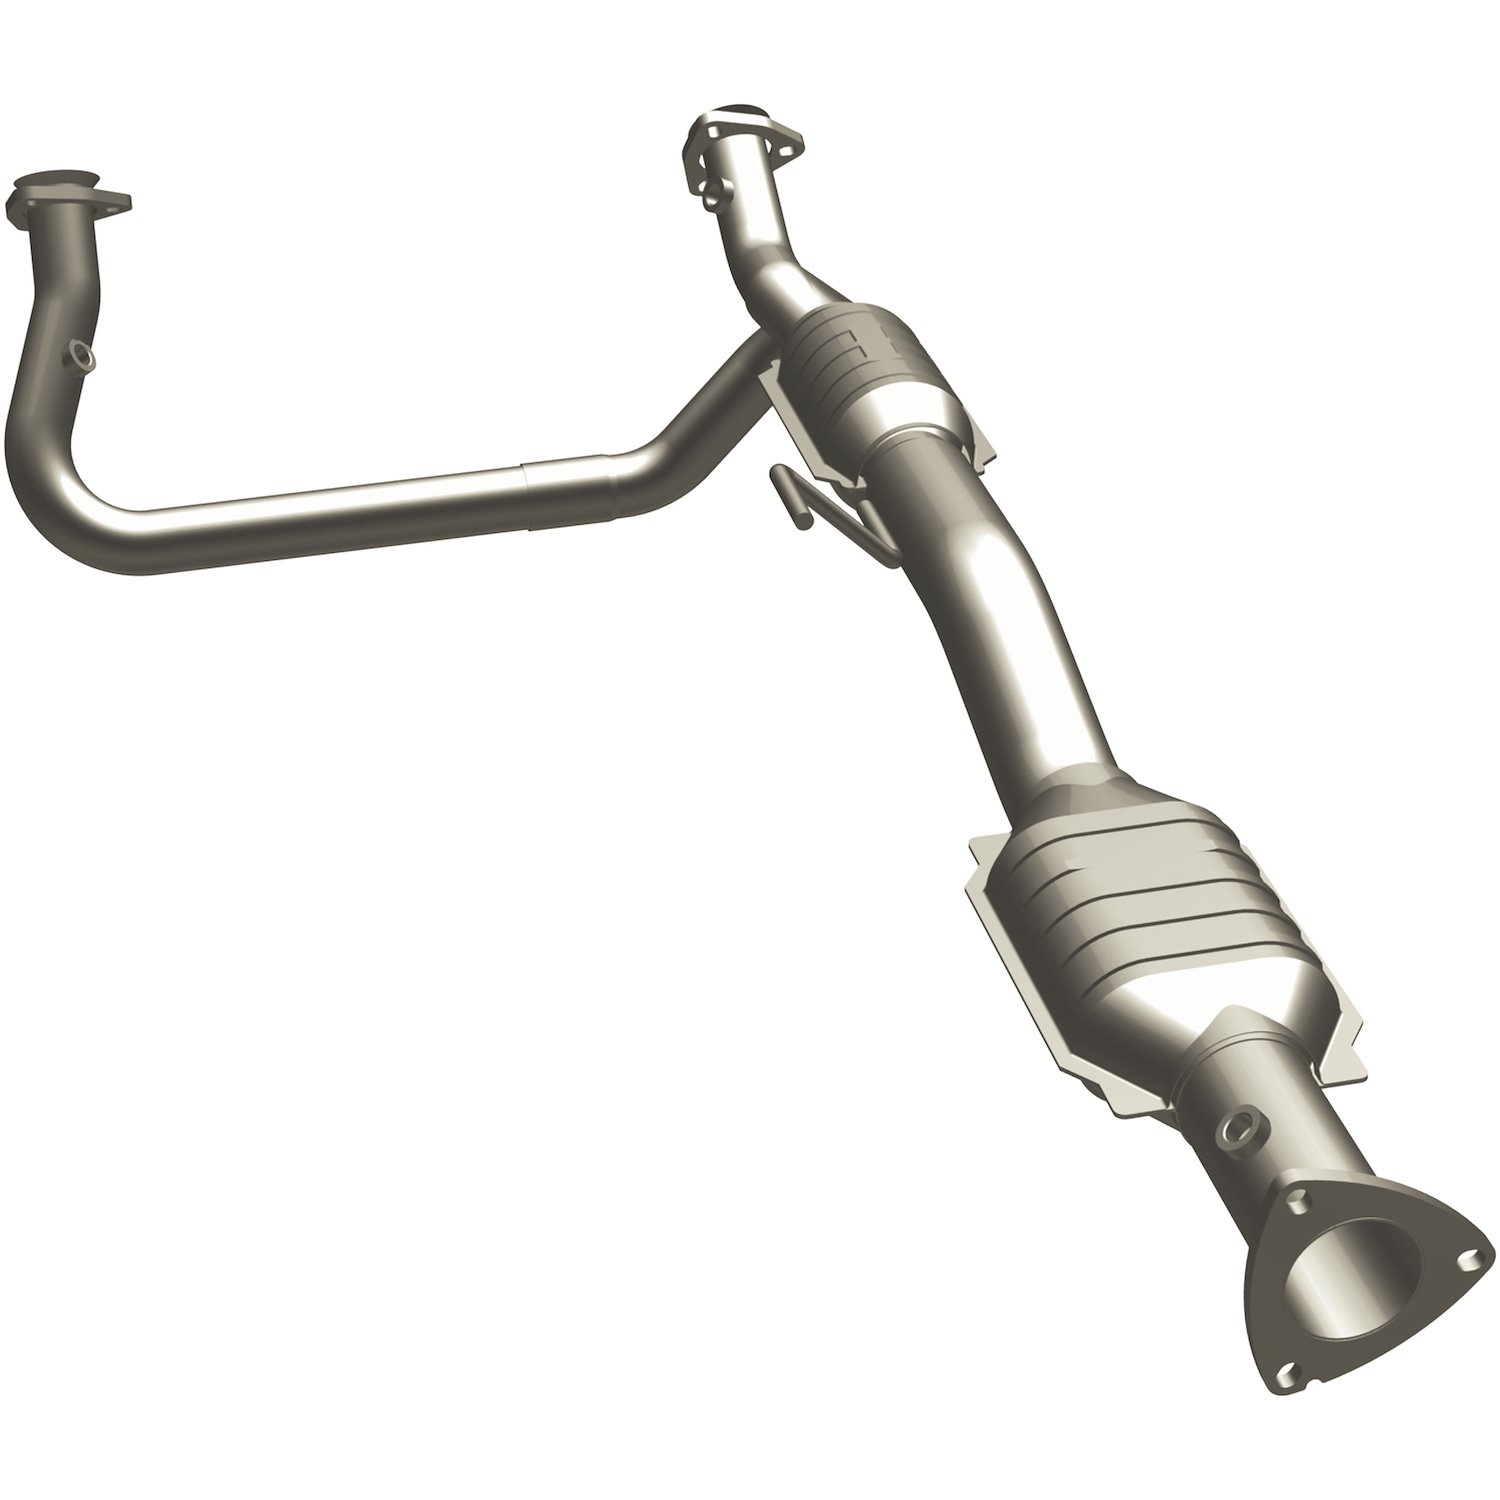 OEM Grade Federal / EPA Compliant Direct-Fit Catalytic Converter 49082